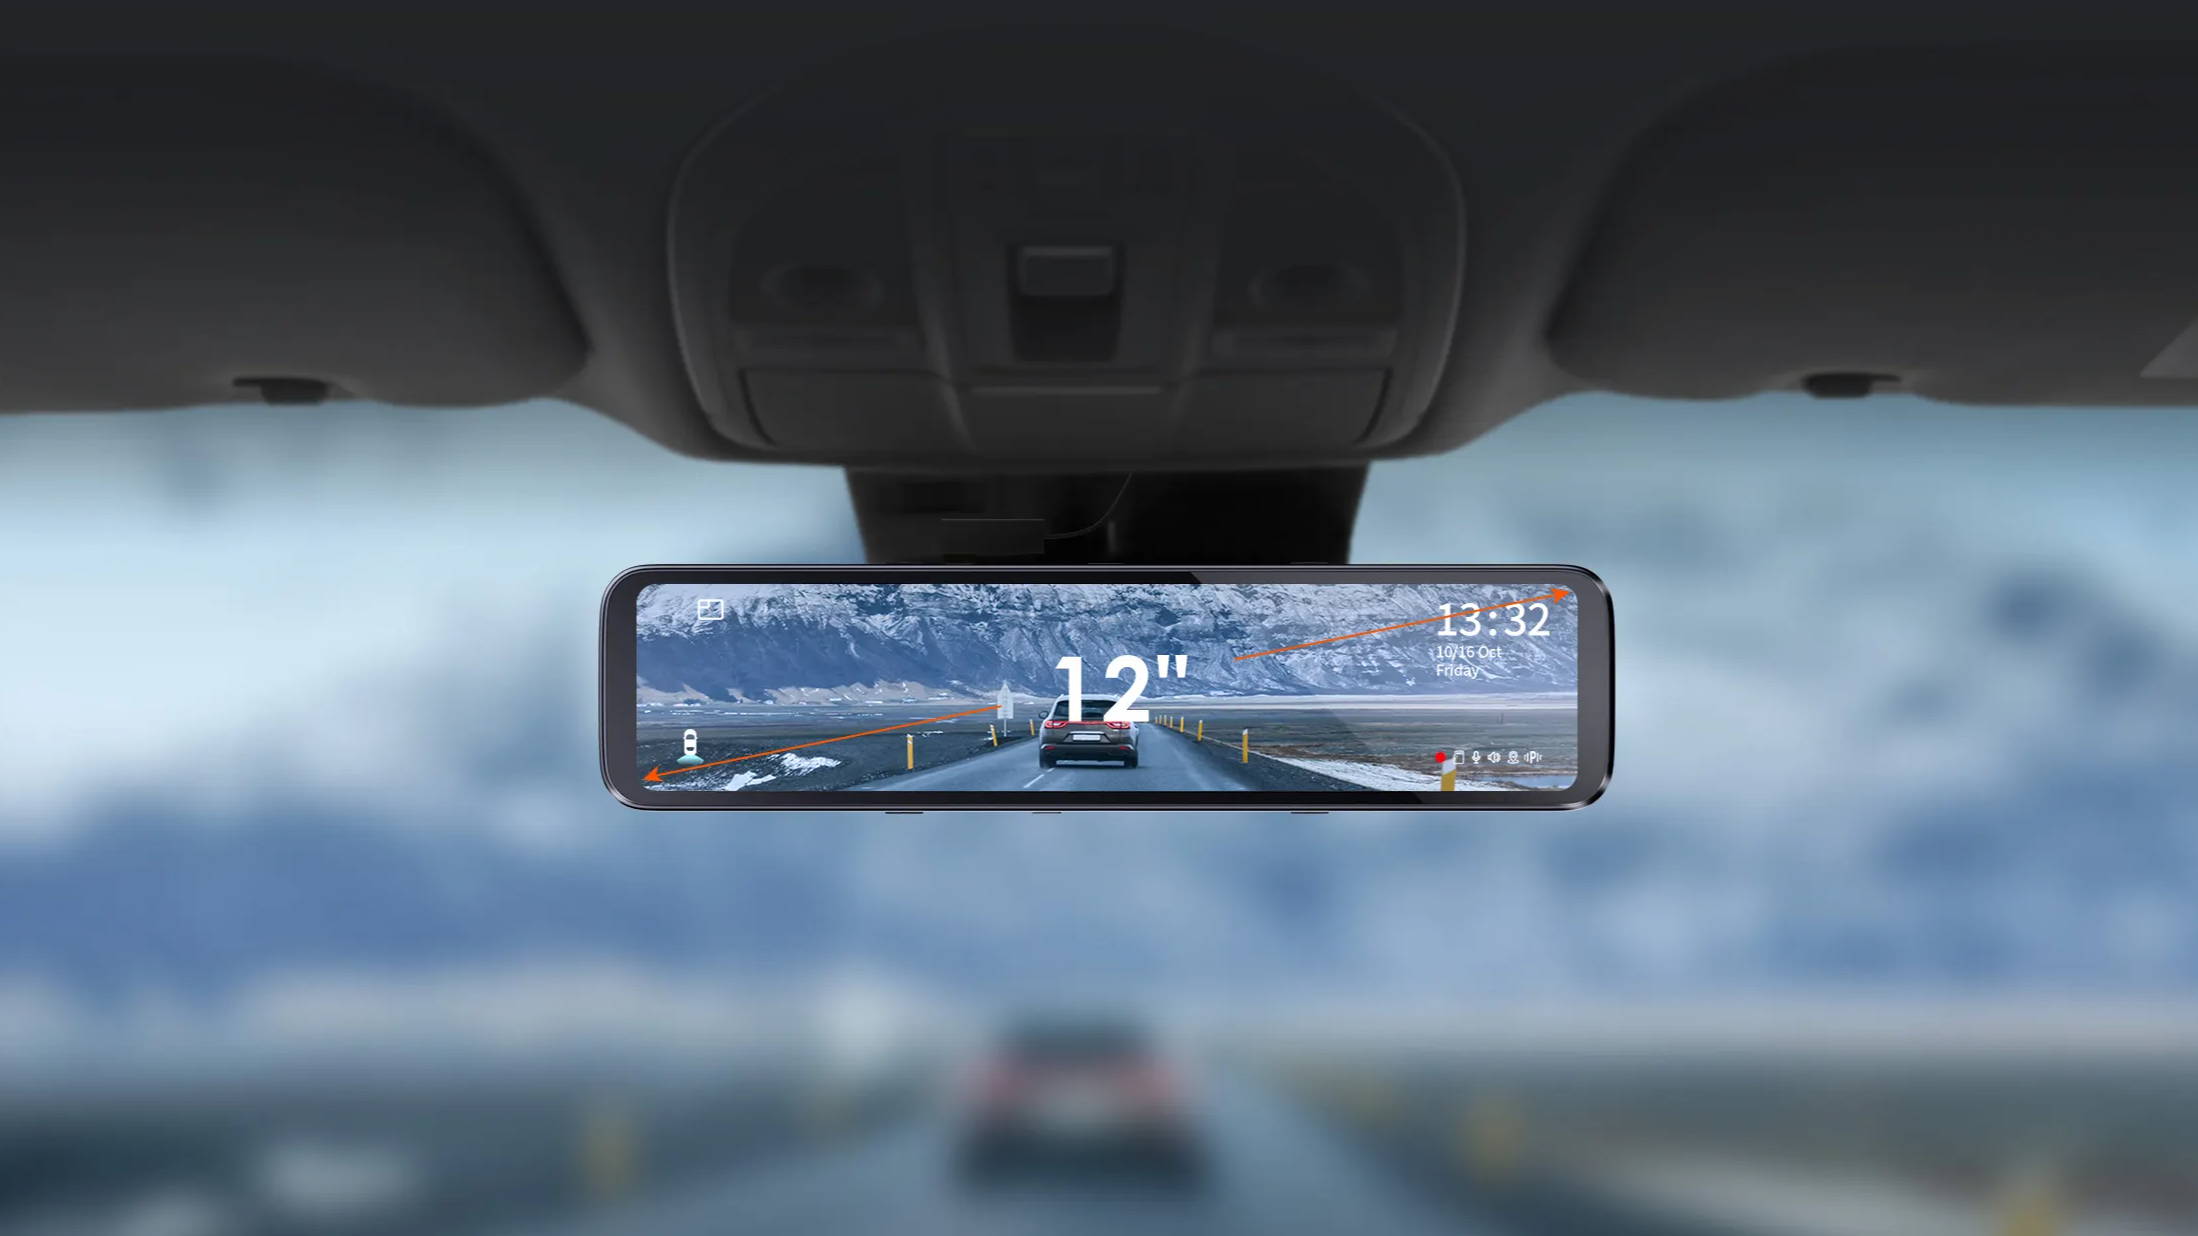 Do you want a clean and discreet dashcam setup without the unwanted wi, dashcam for cars